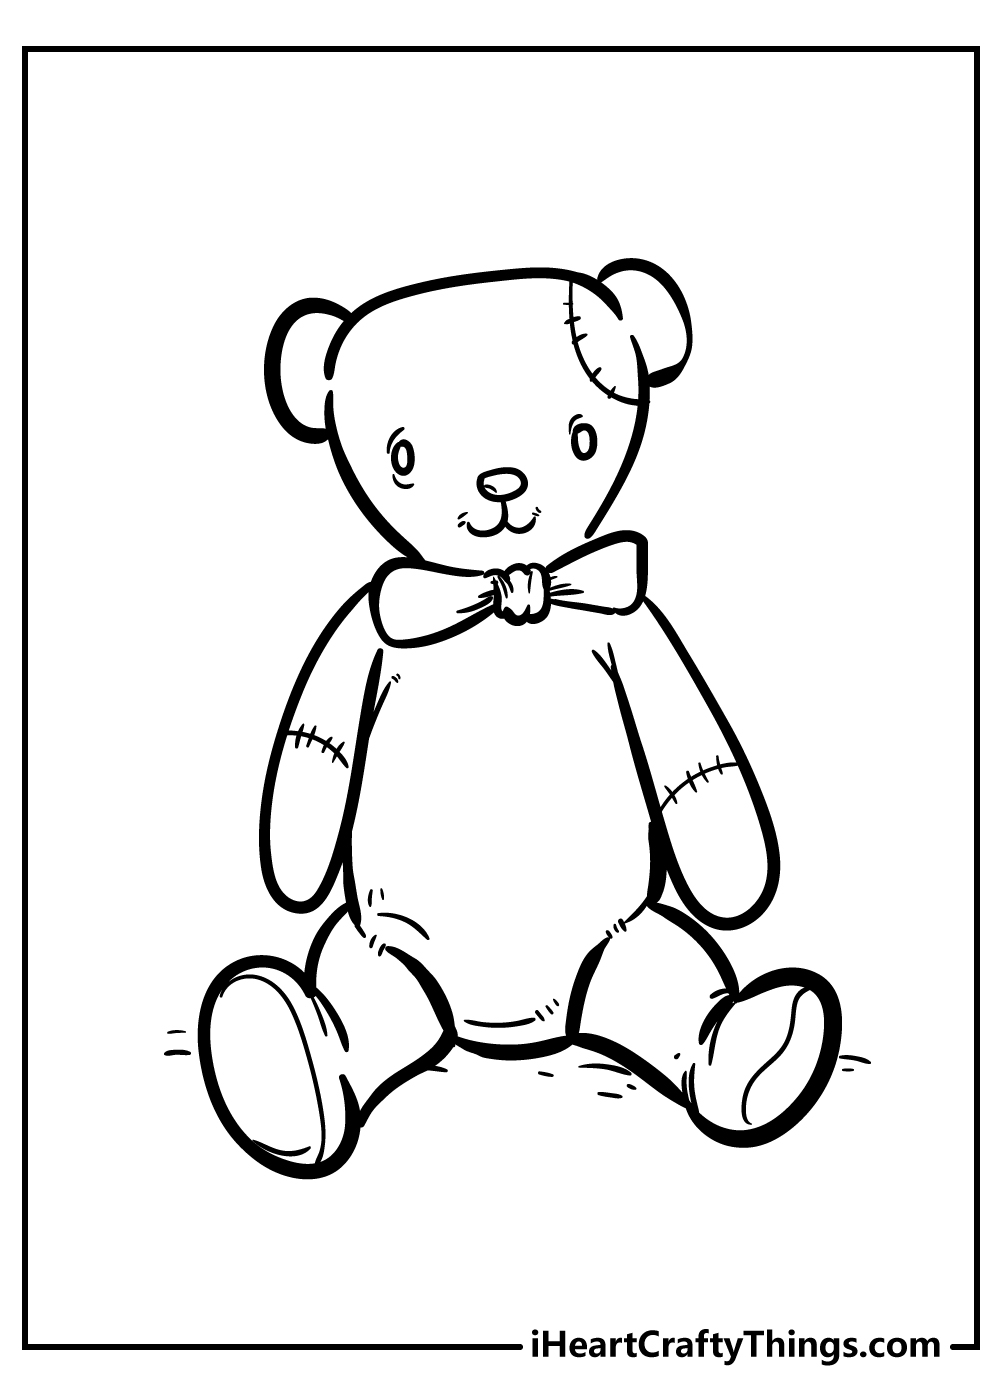 Teddy bear coloring pages free printables